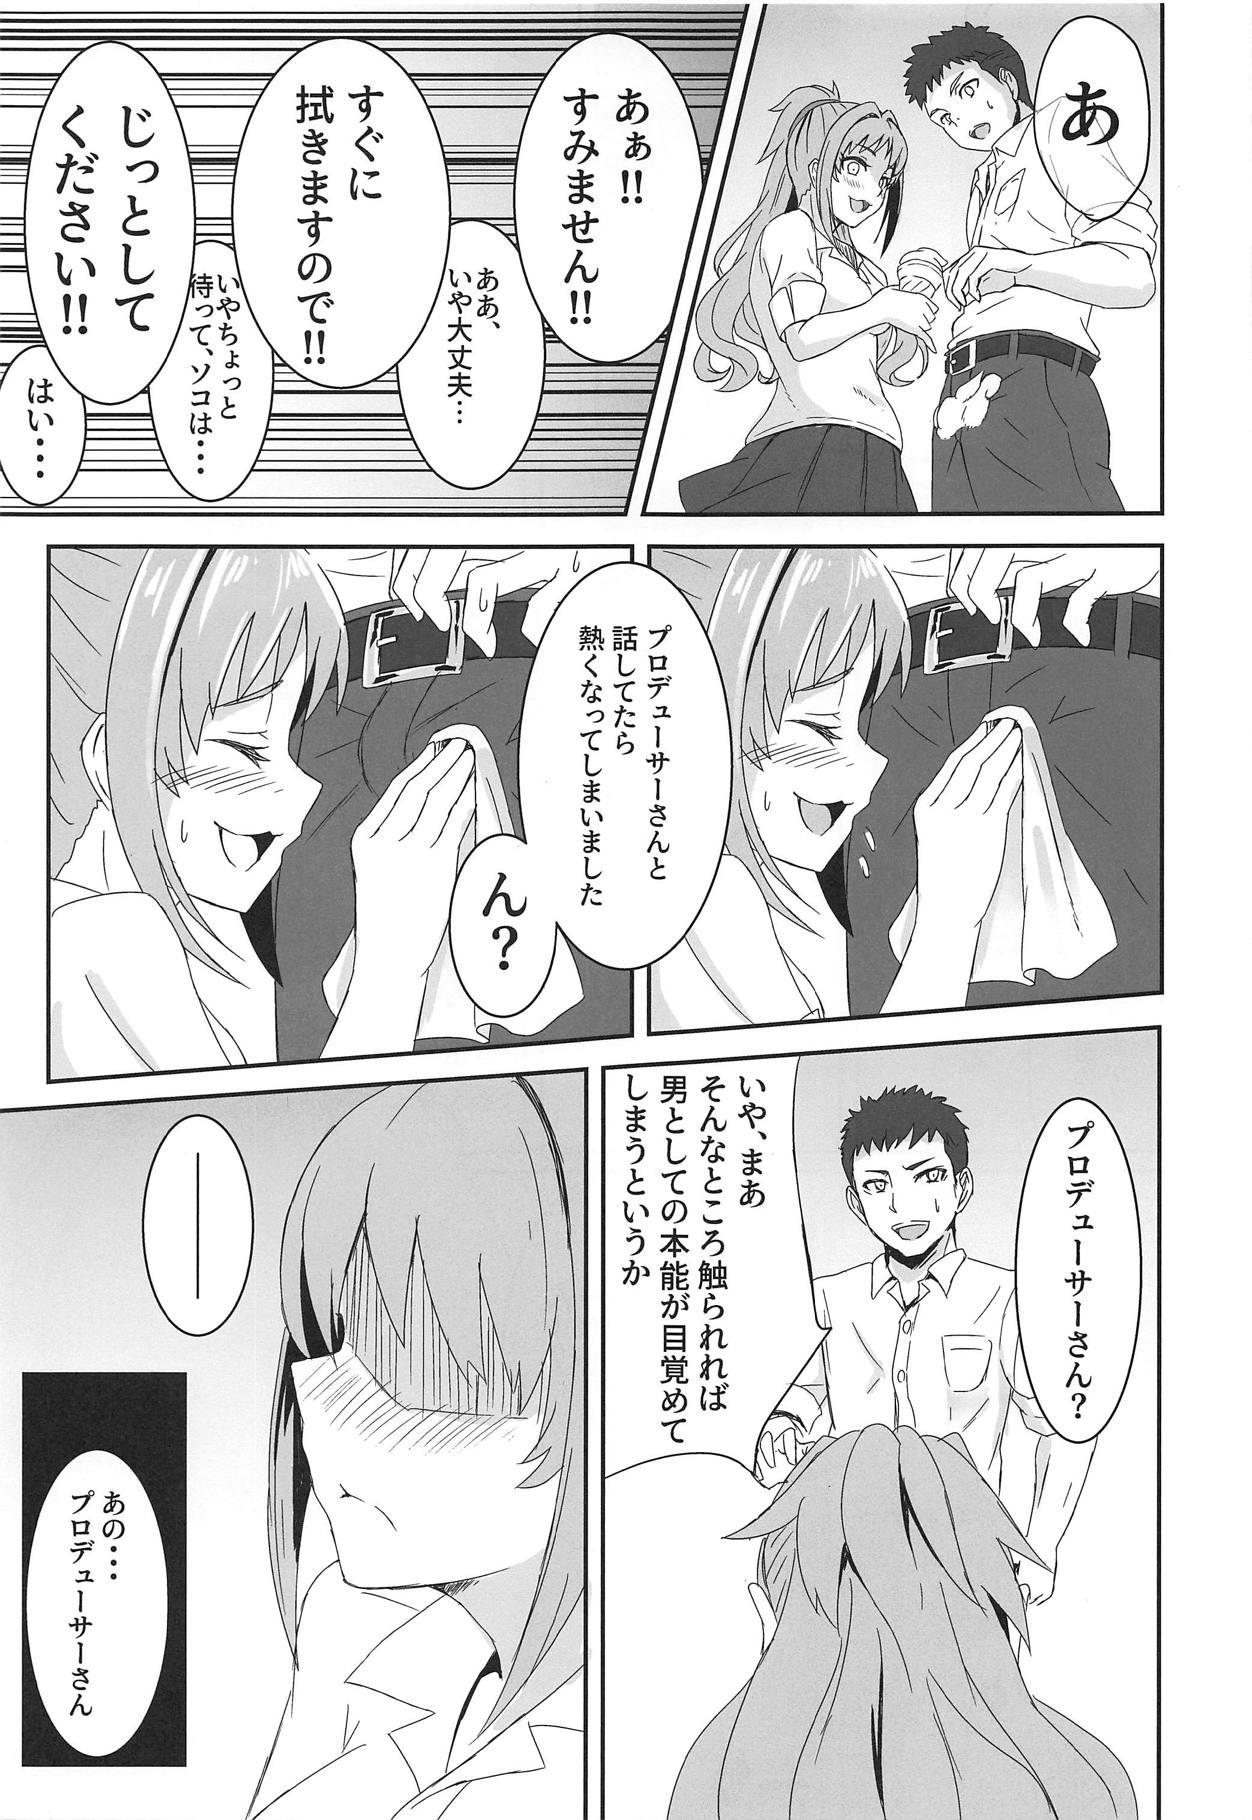 Rubbing Ax3S! - The idolmaster Gay Longhair - Page 4